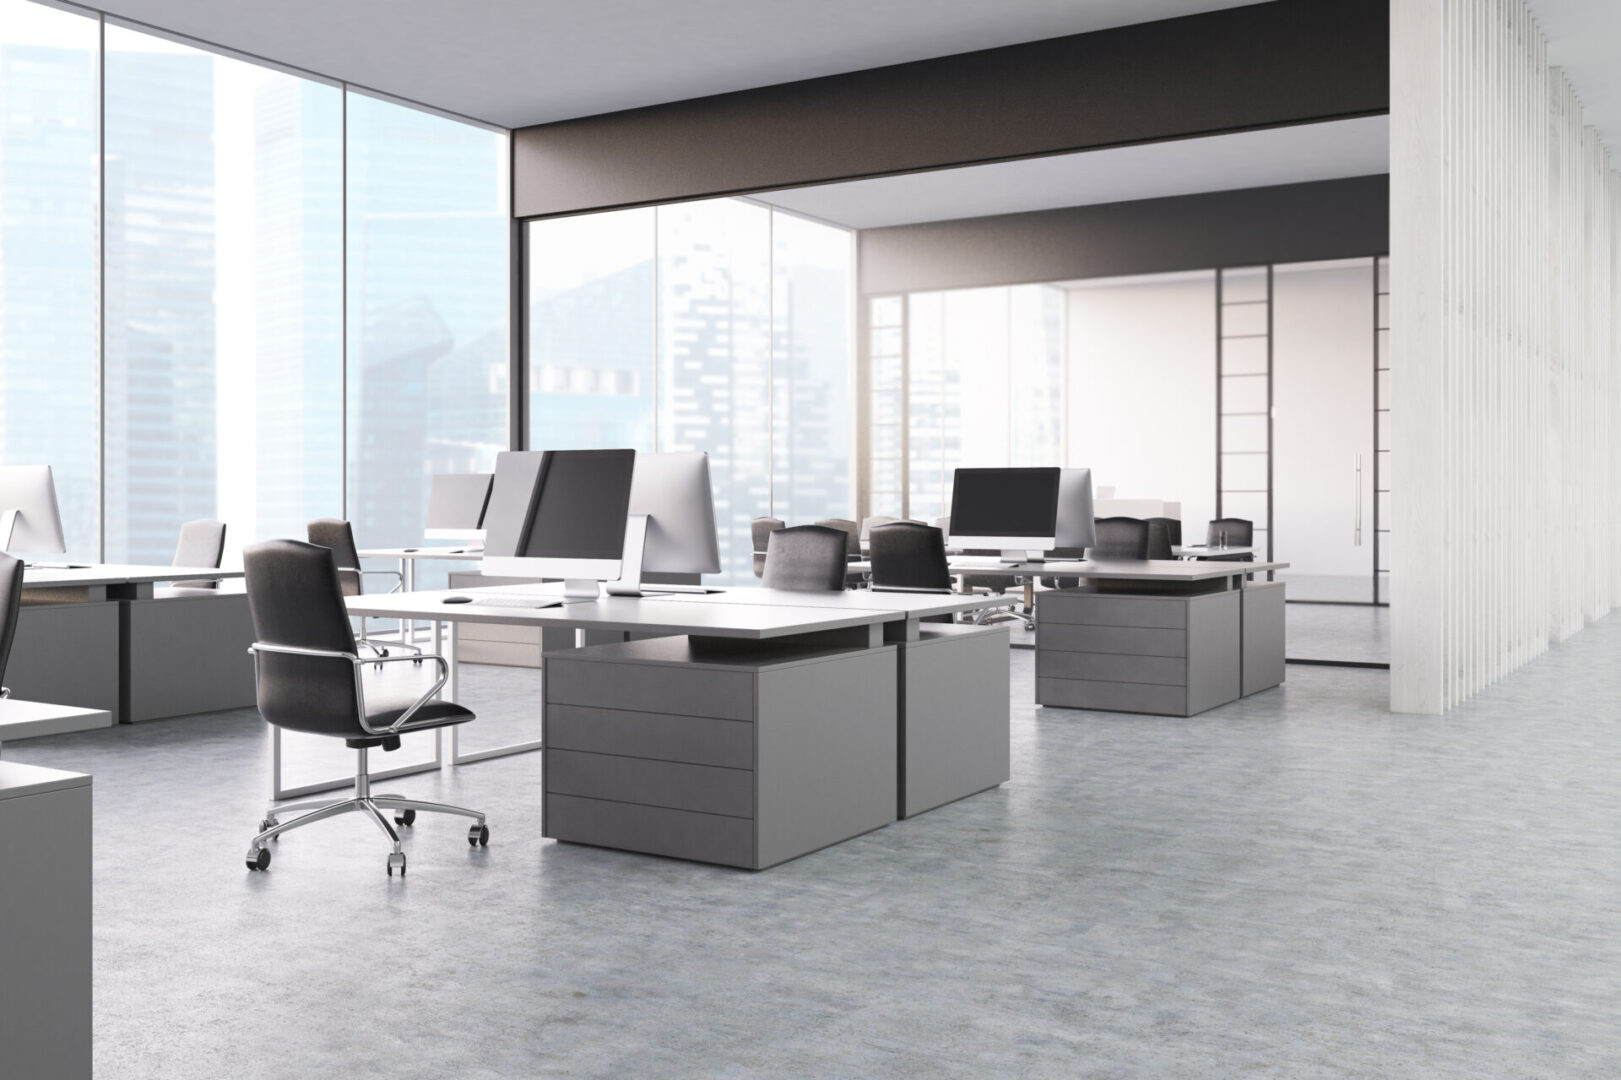 A large open office space with desks and chairs.